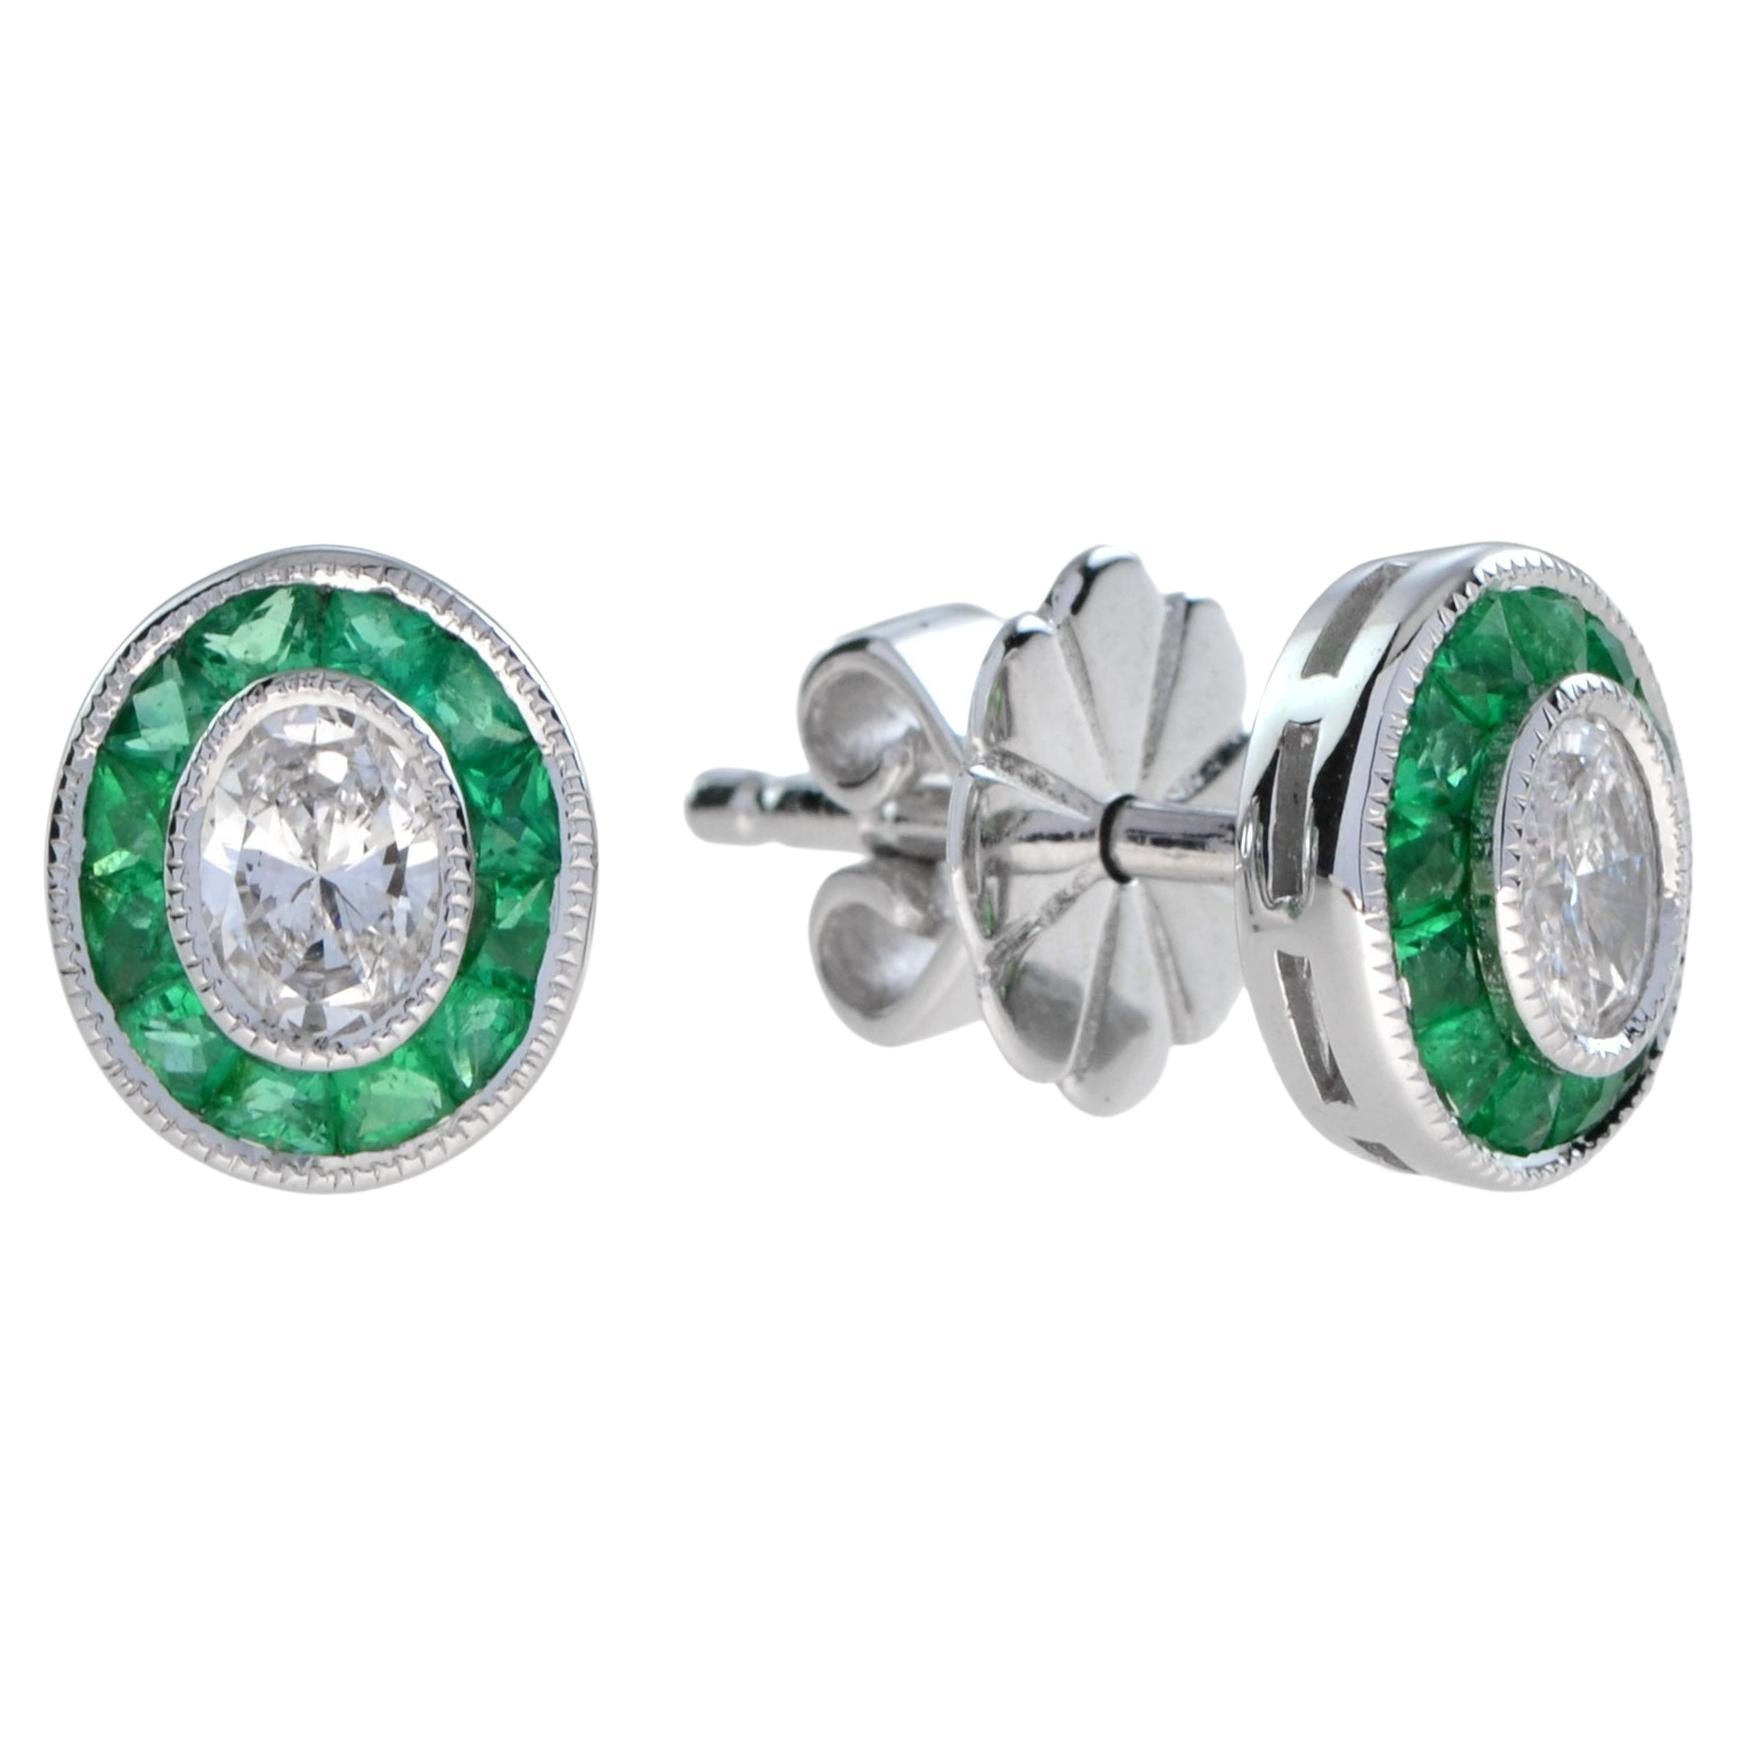 Diamond and Emerald Art Deco Style Target Stud Earrings in 18K White Gold